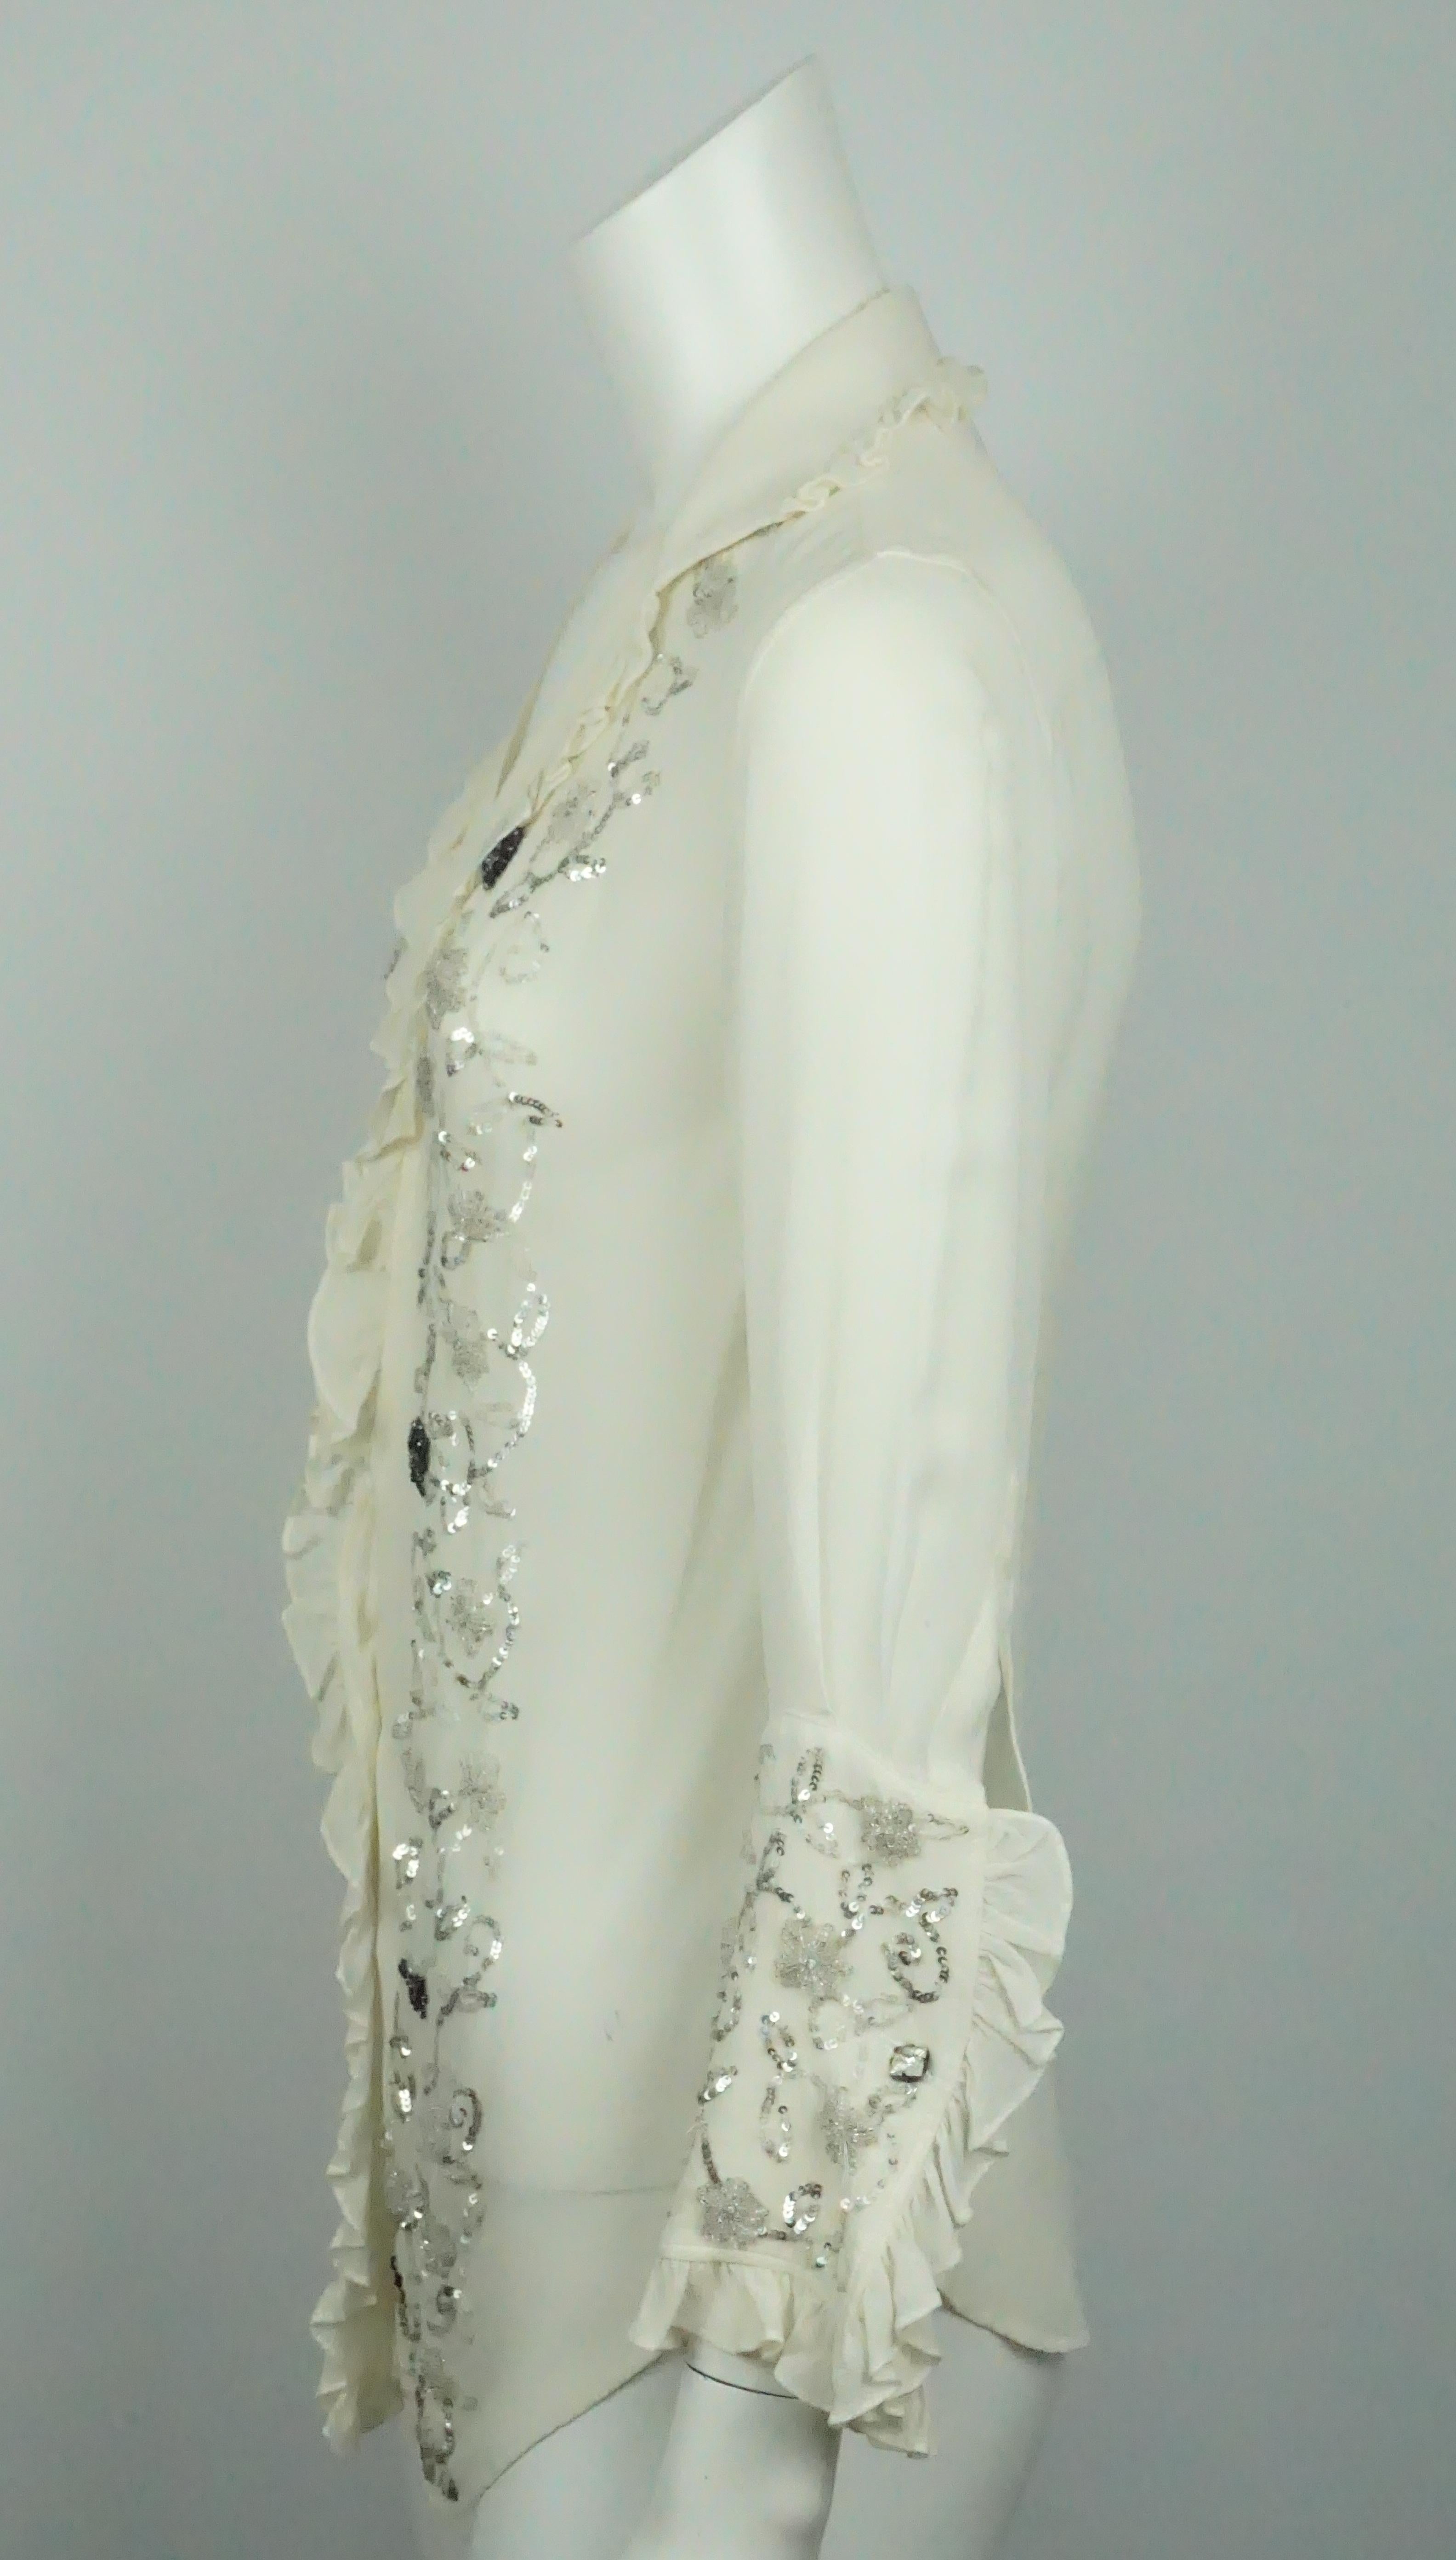 Dolce & Gabbana Ivory Silk Chiffon Top w/ Beaded Details - Medium  This gorgeous silk chiffon top is in excellent condition. There are ruffles around the collar, down the middle where the buttons are located, and around the cuffs. On the center